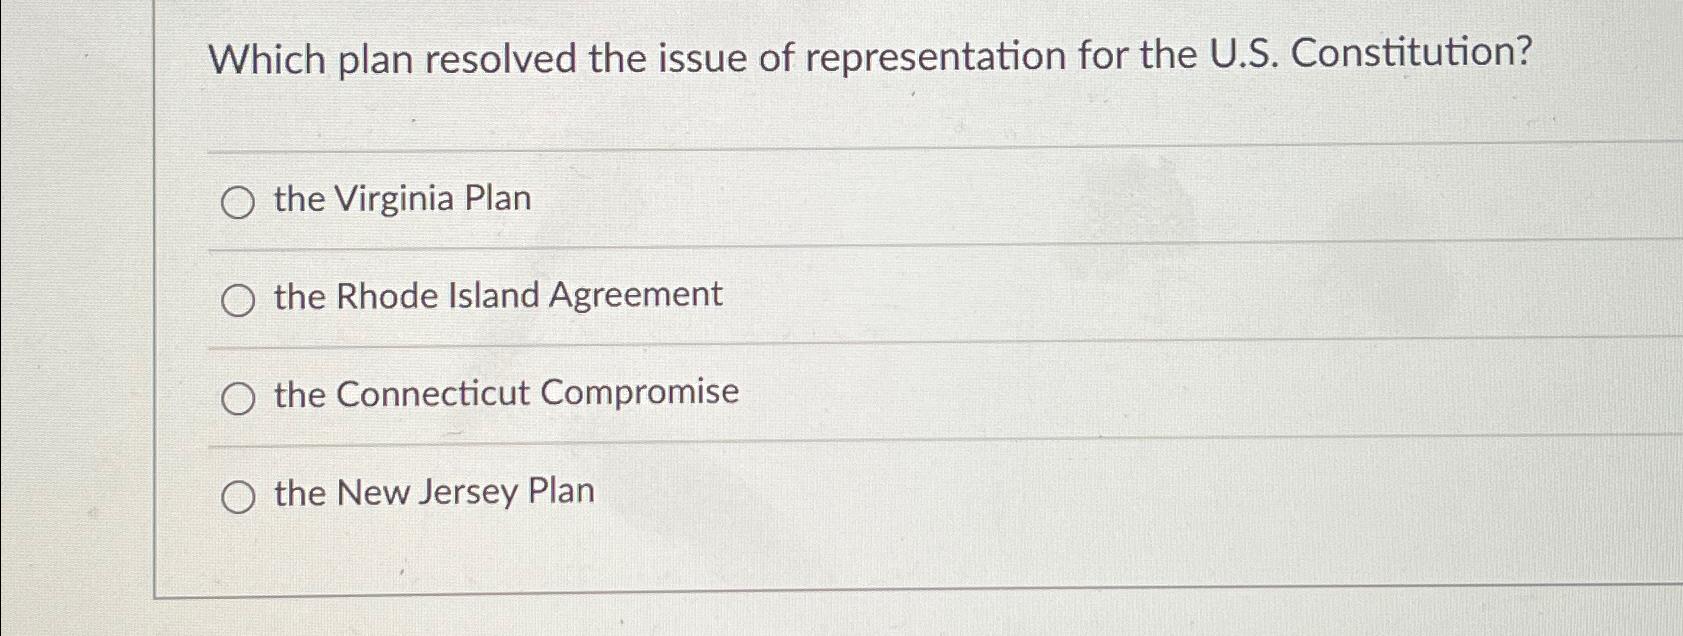 which plan resolved the problem of representation